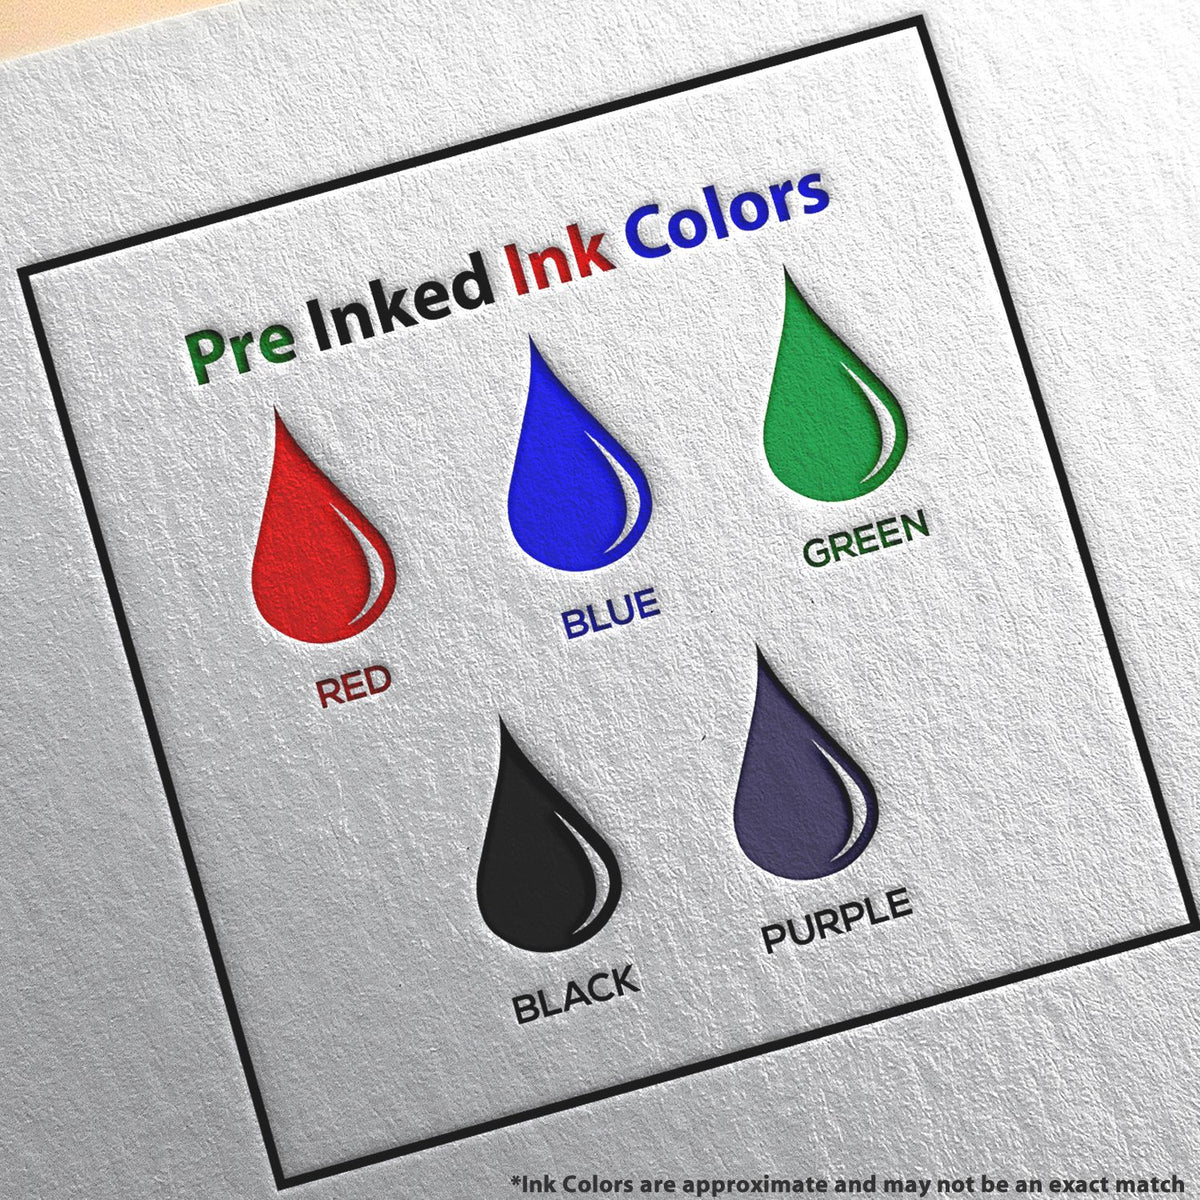 A picture showing the different ink colors or hues available for the Slim Pre-Inked Michigan Professional Engineer Seal Stamp product.